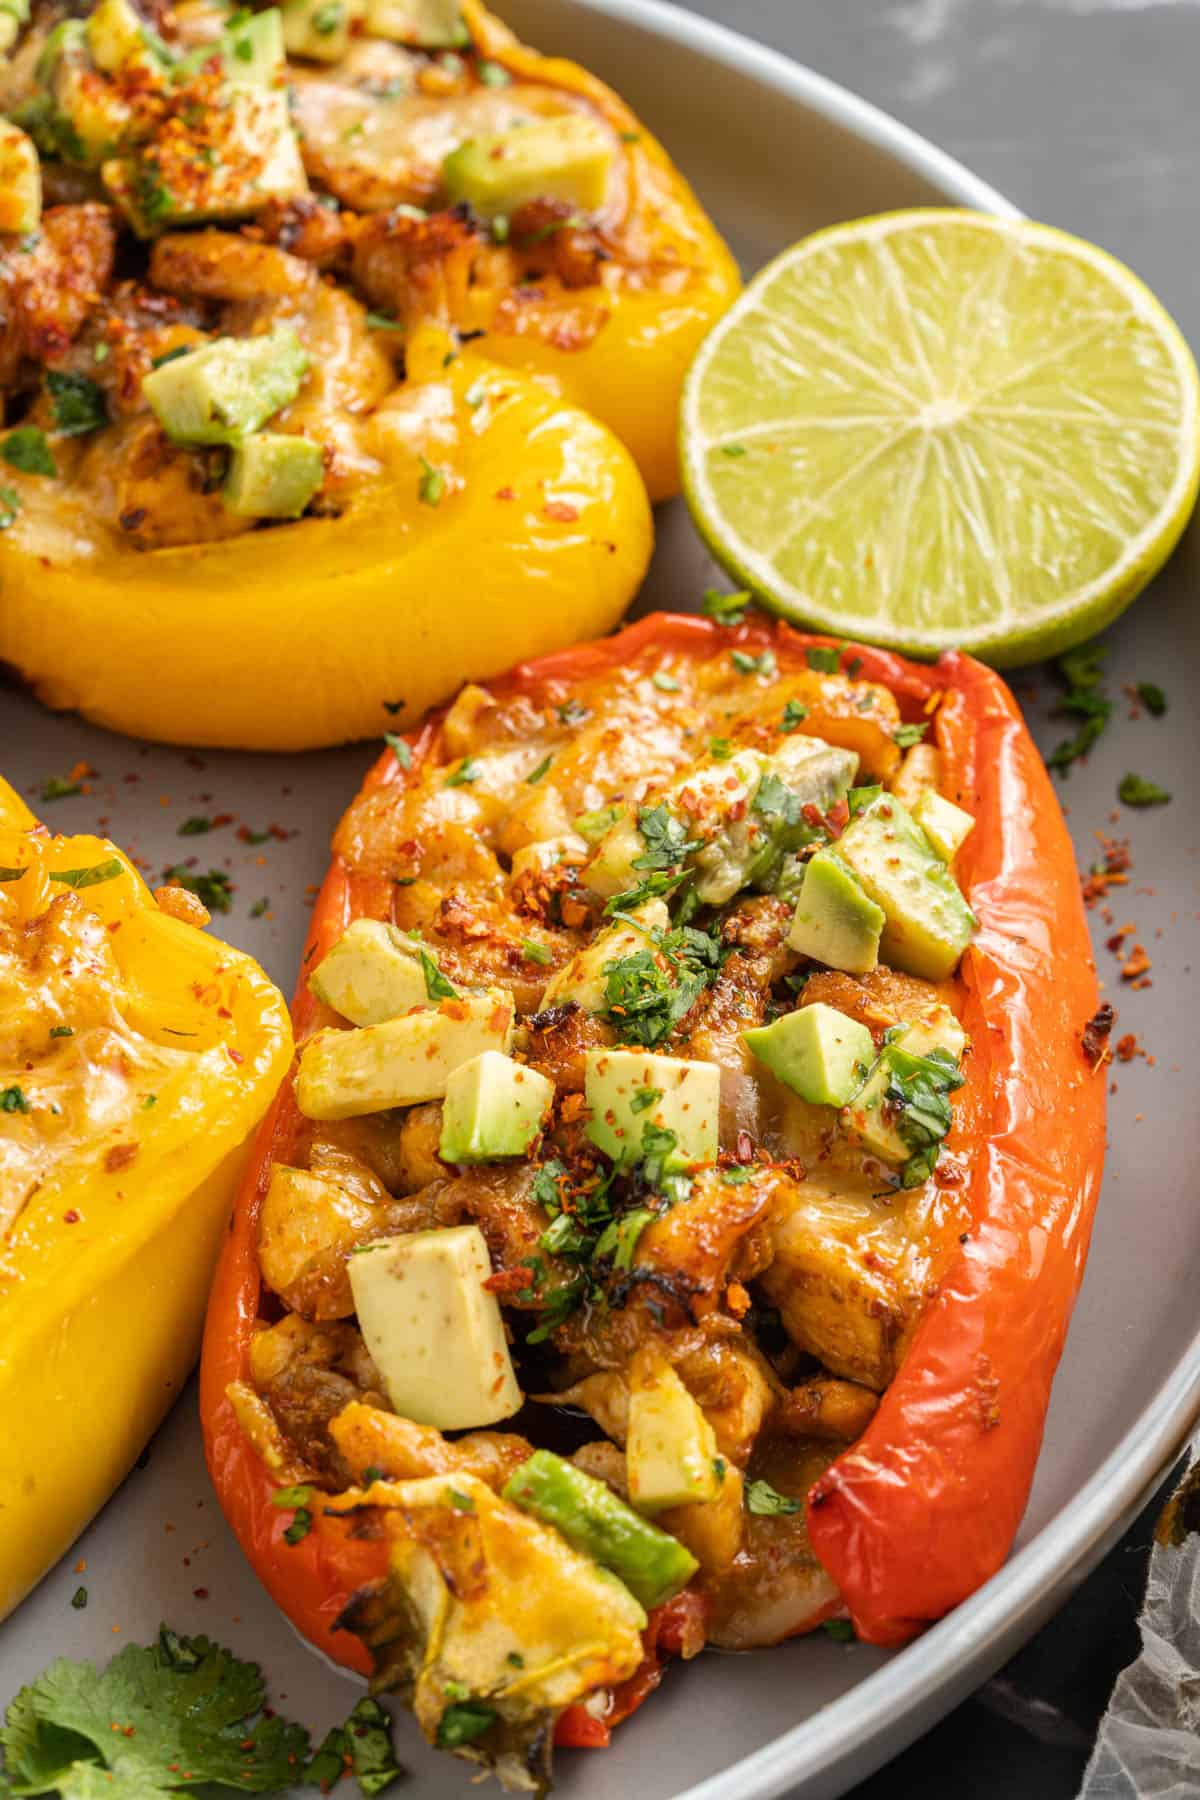 Fajita chicken stuffed bell peppers on a plate next to half a lime.